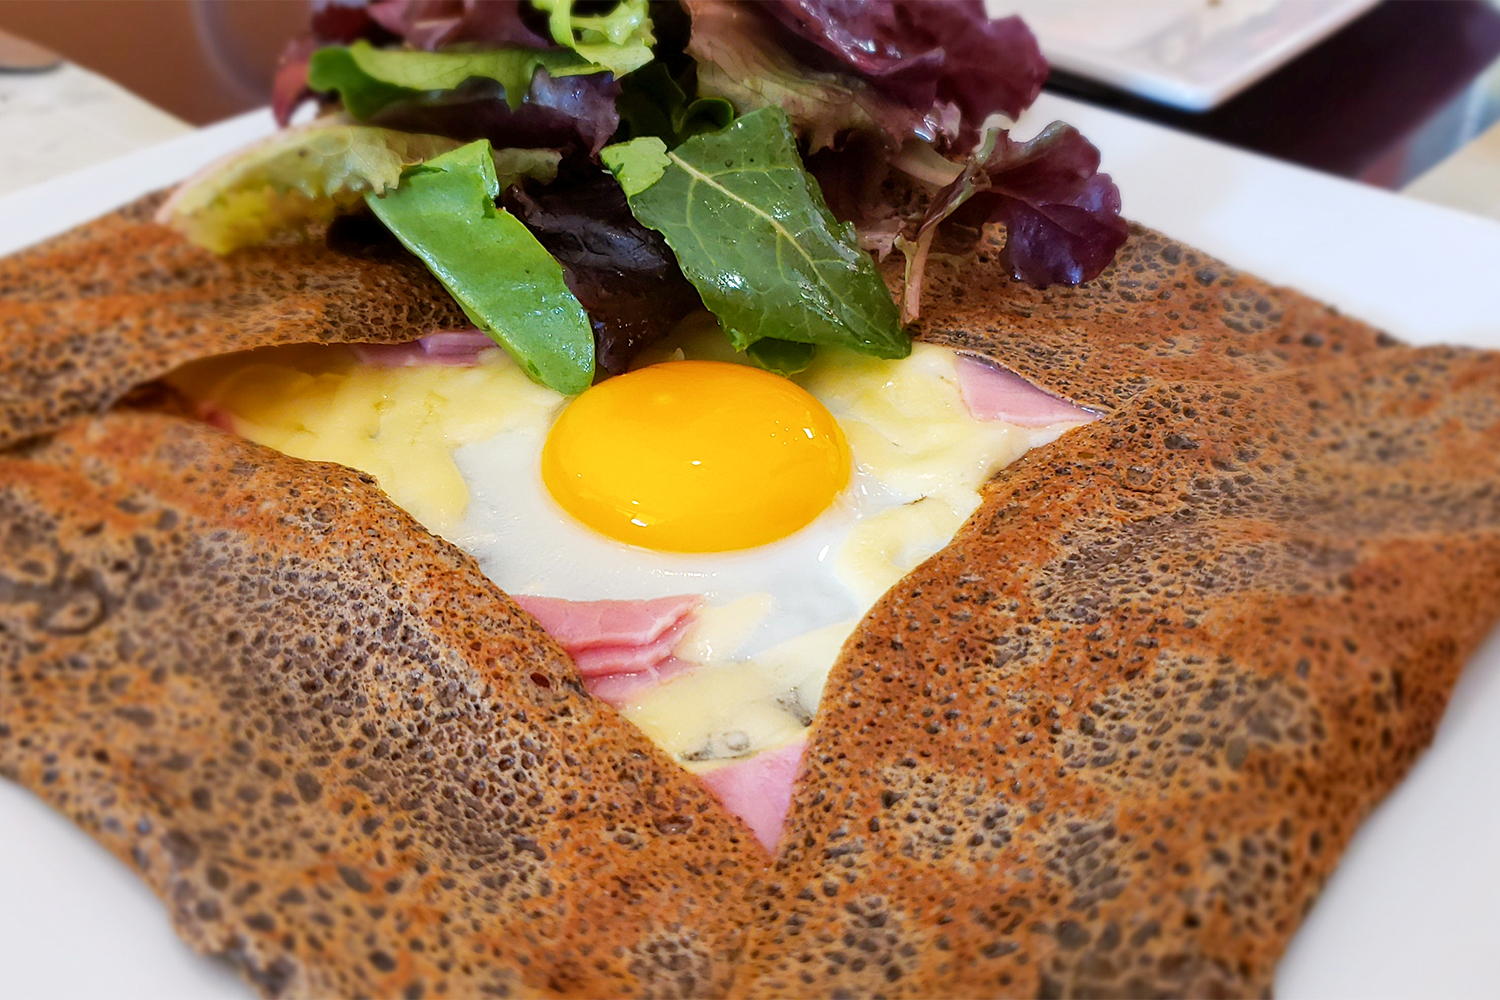 Ham and Swiss crepe at Creperie Chez Solange in Larkfield. Heather Irwin/PD.